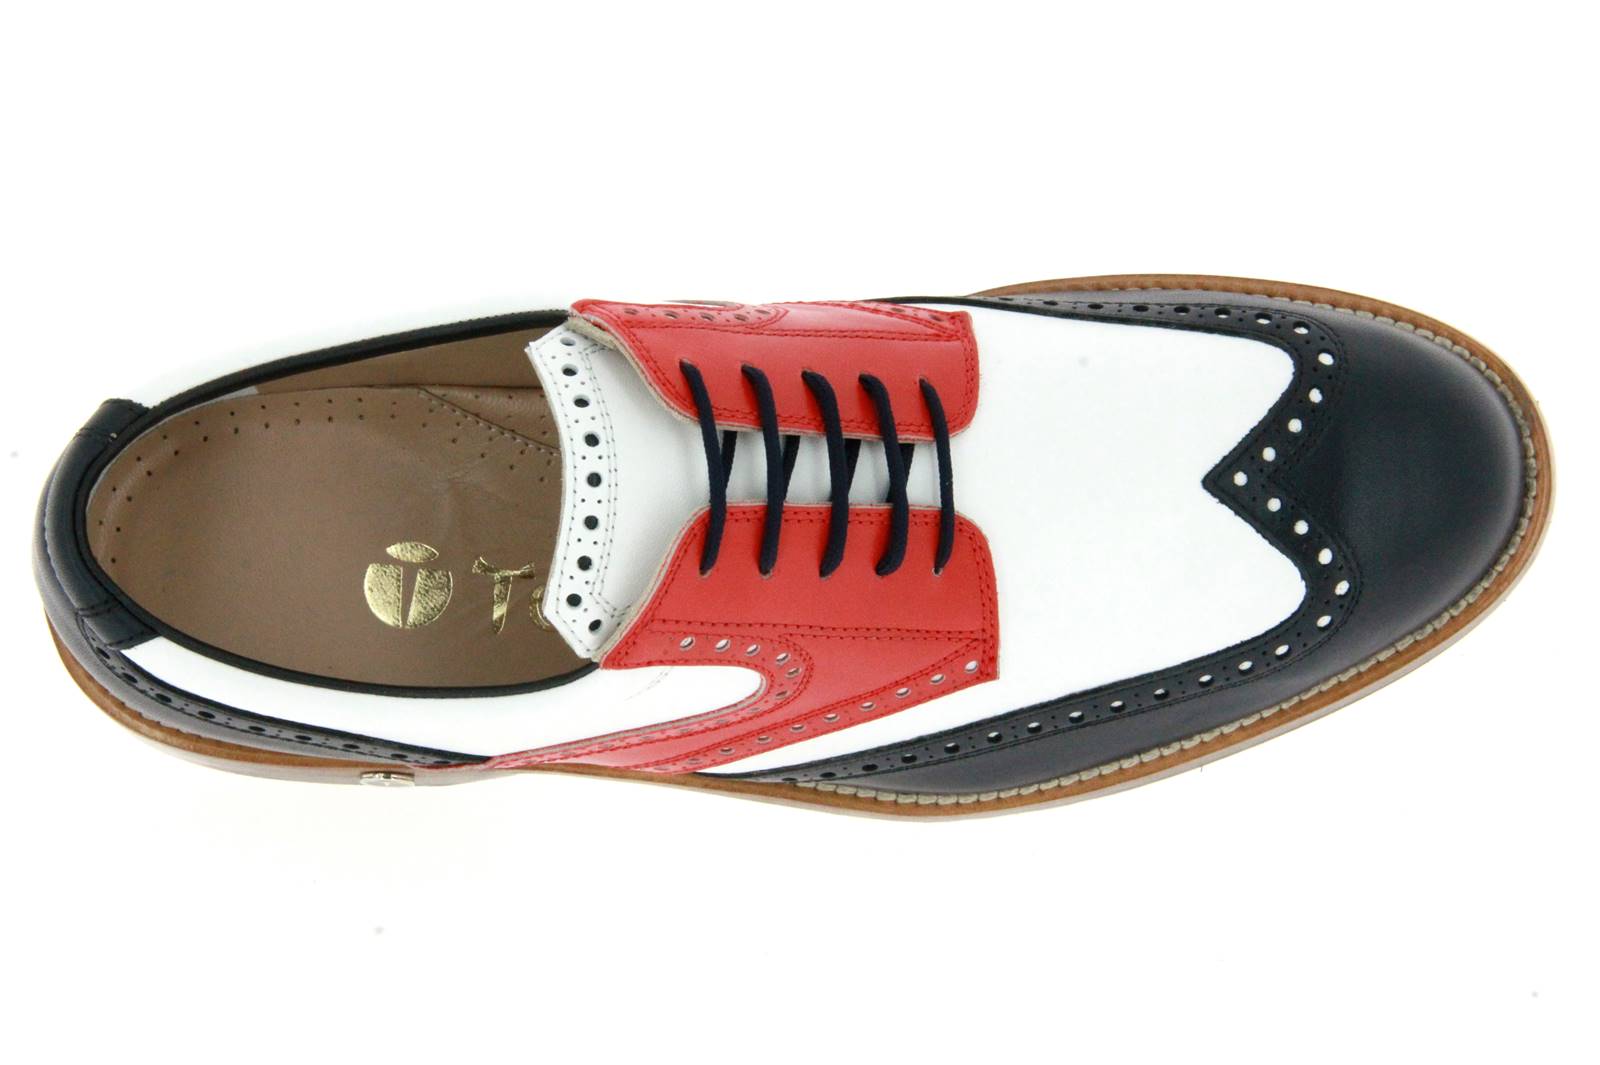 tee-golf-shoes-tommy-bianco-rosso-blu-3